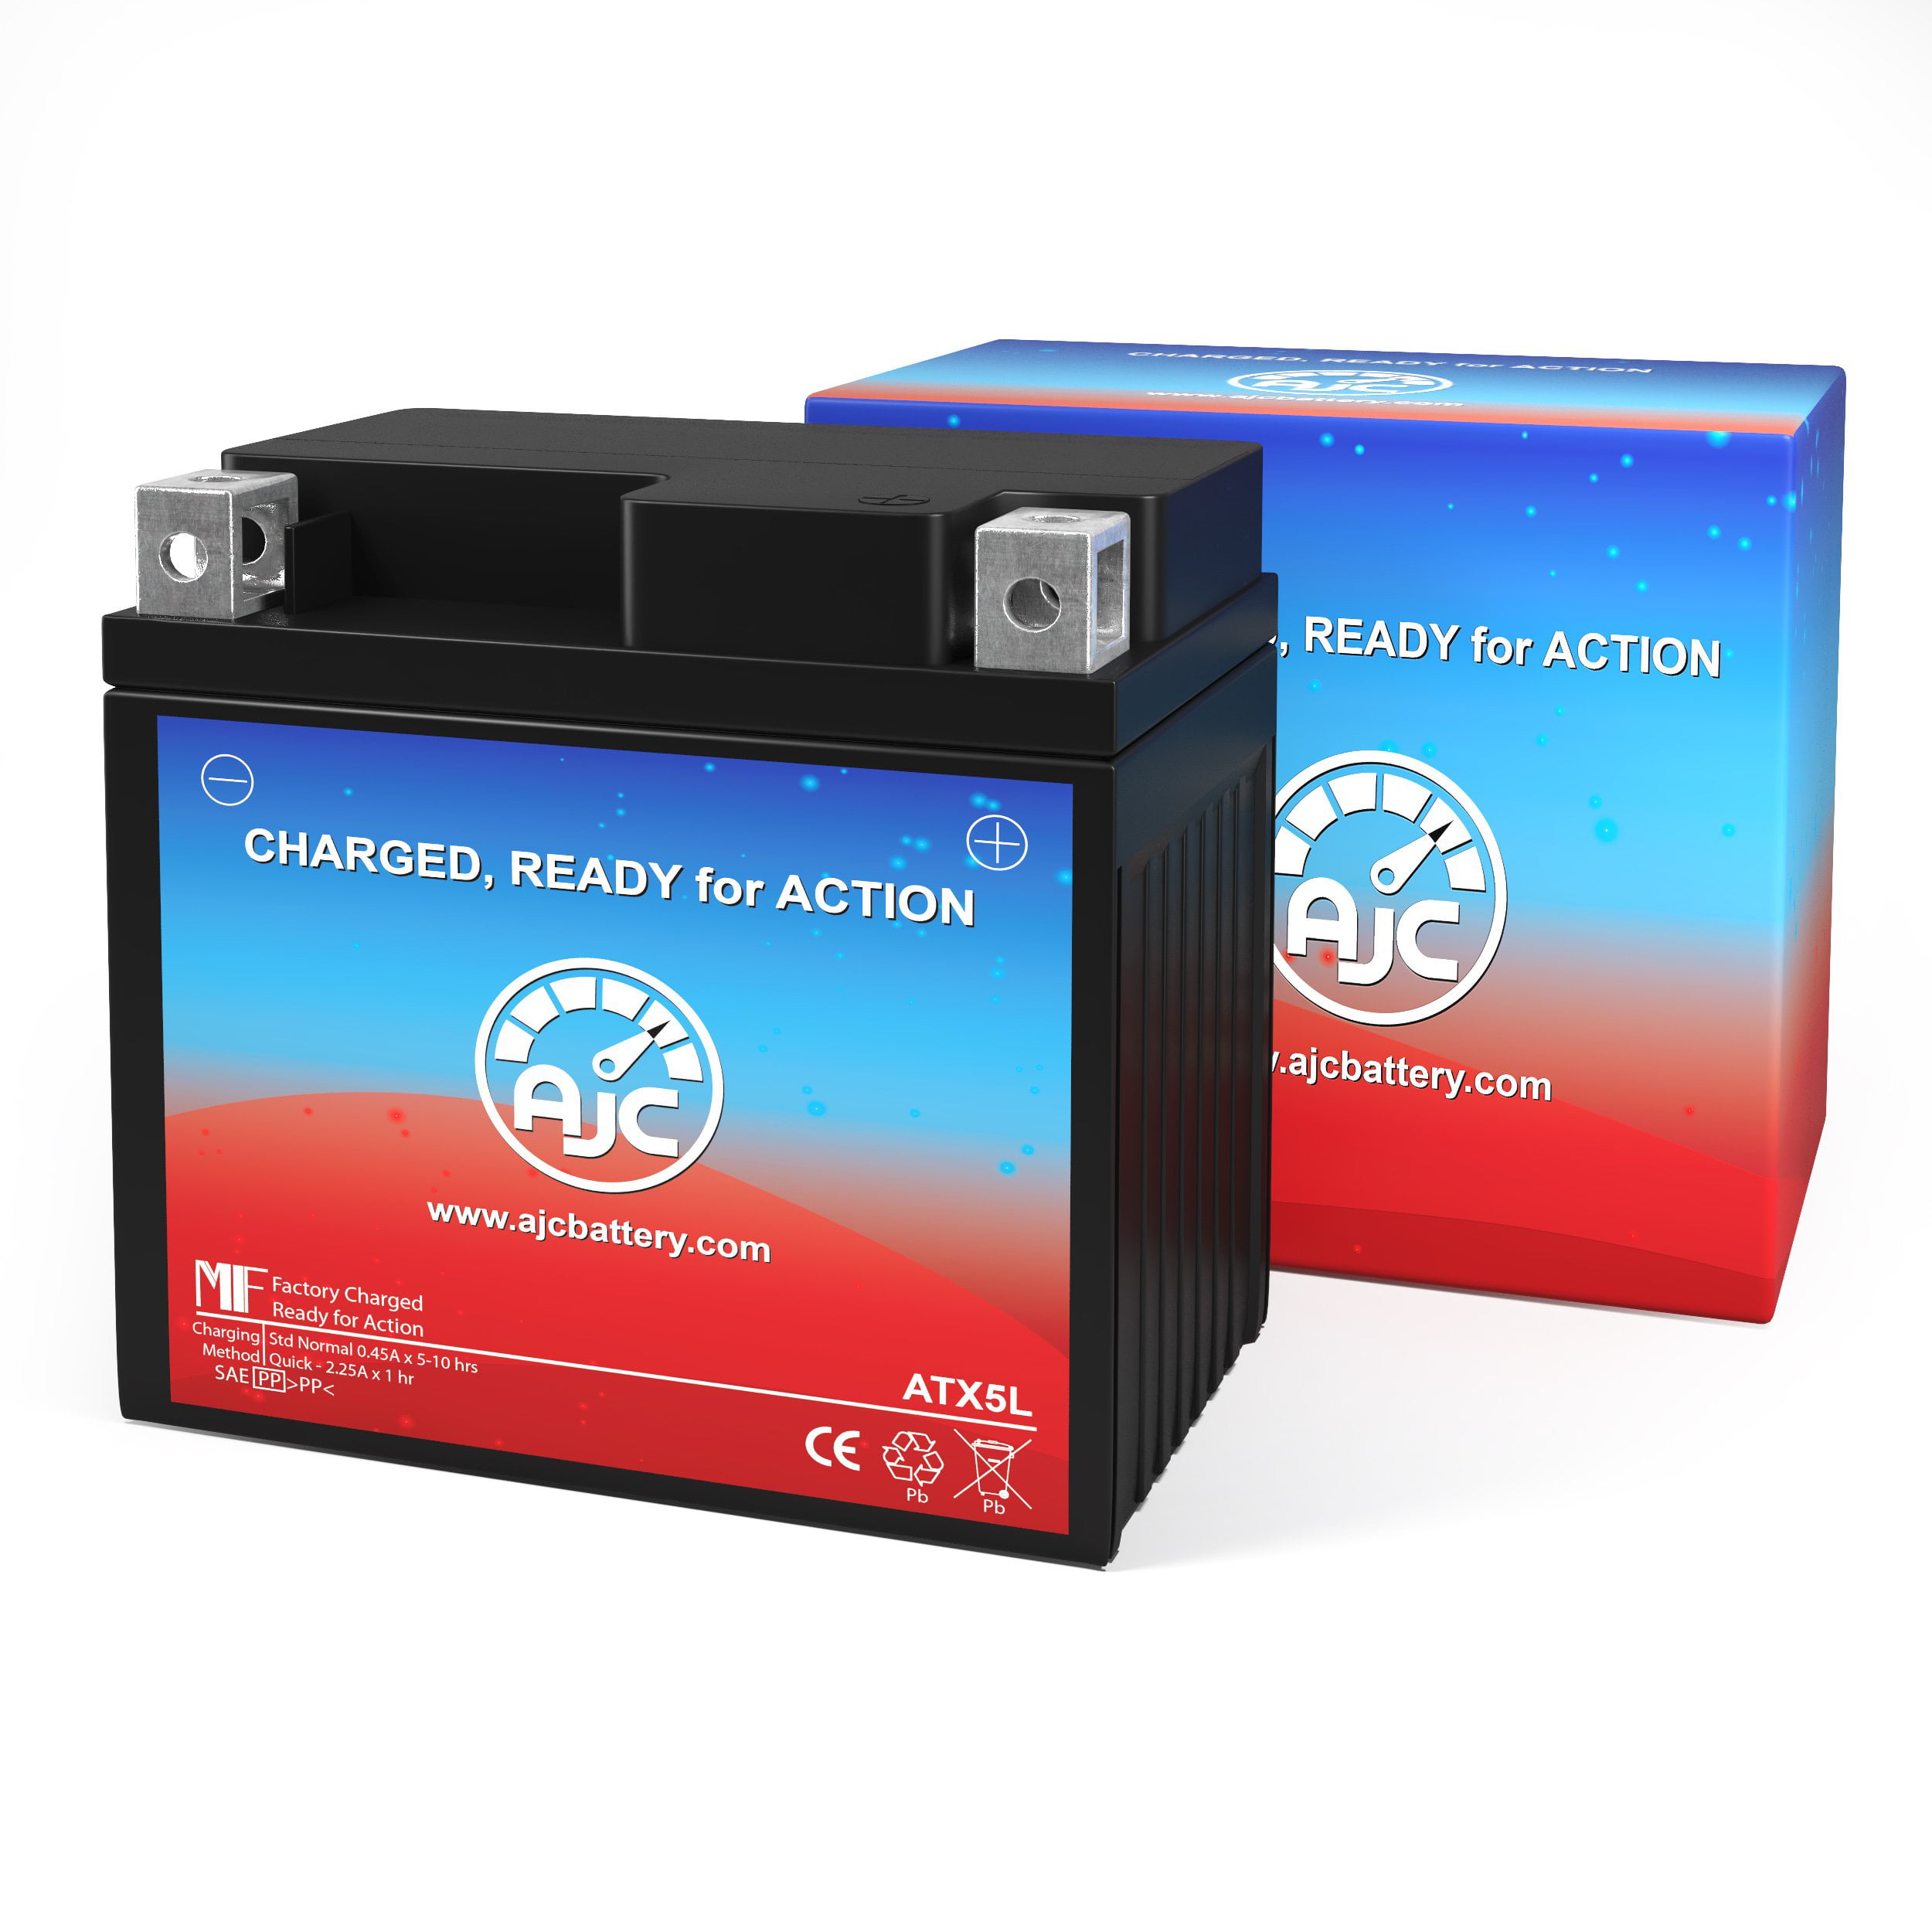 Everstart Es5l Bs 12v Powersports Replacement Battery This Is An Ajc Brand Replacement Walmart Com